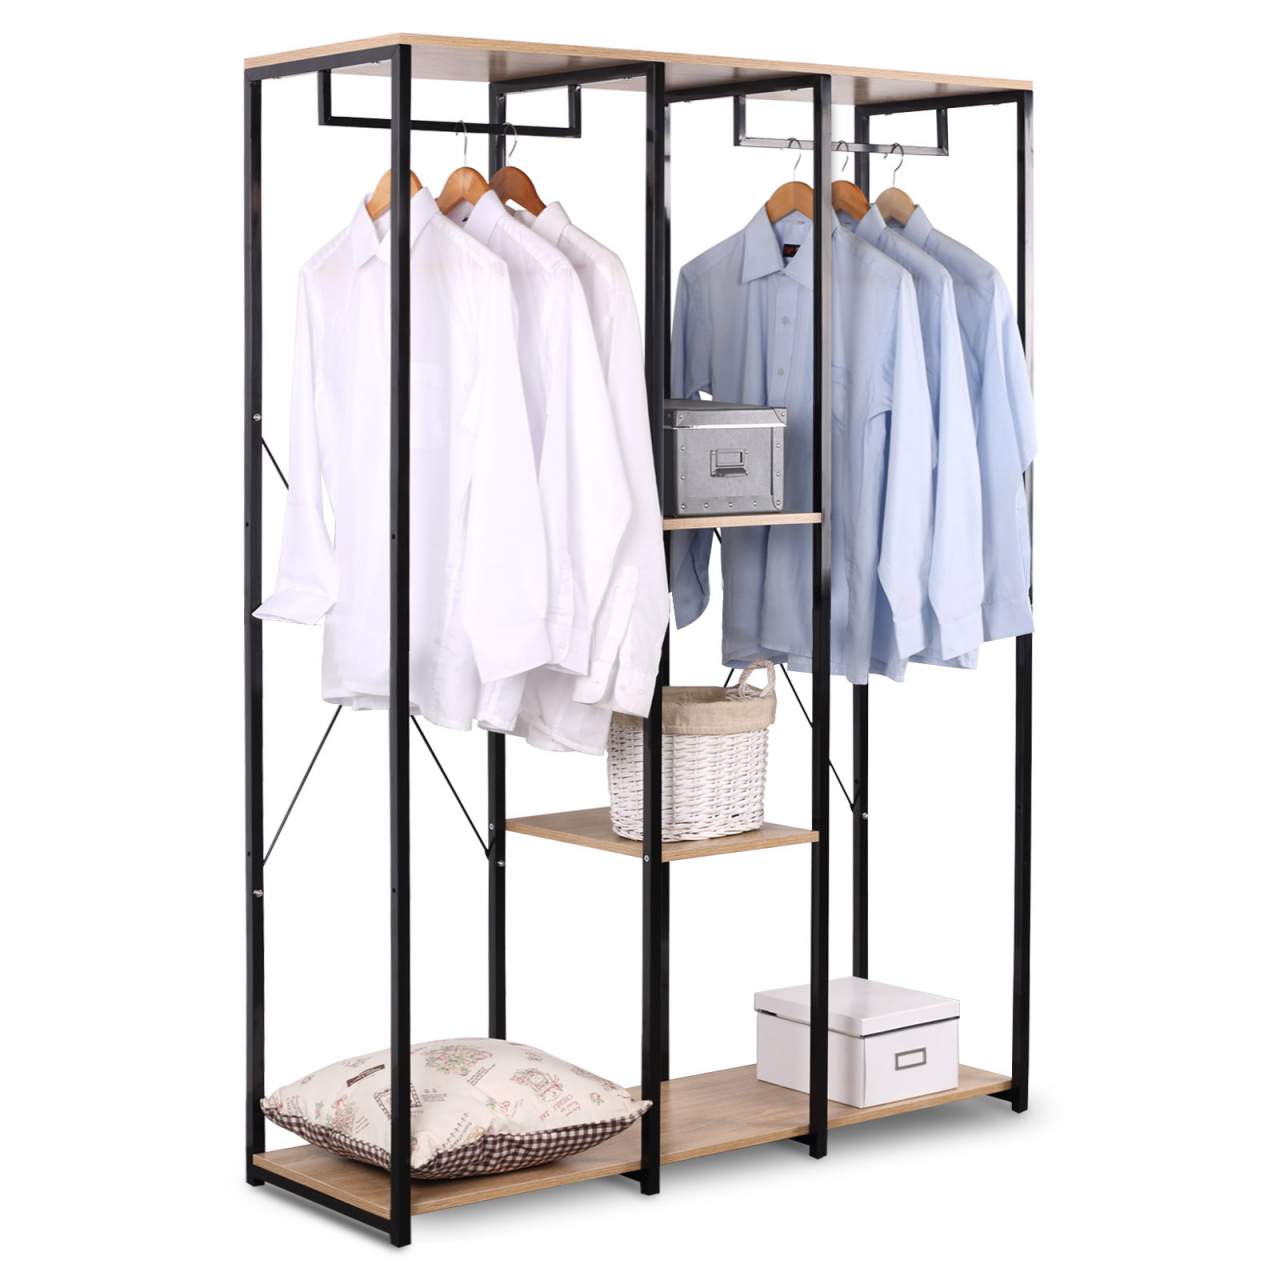 SONGMICS Double Clothes Rail Telescopic Extendable Coat Garment Rack with Shoe Shelf Stainless Steel Clad Pipe 154 x 42 x 172 cm LLR03W 